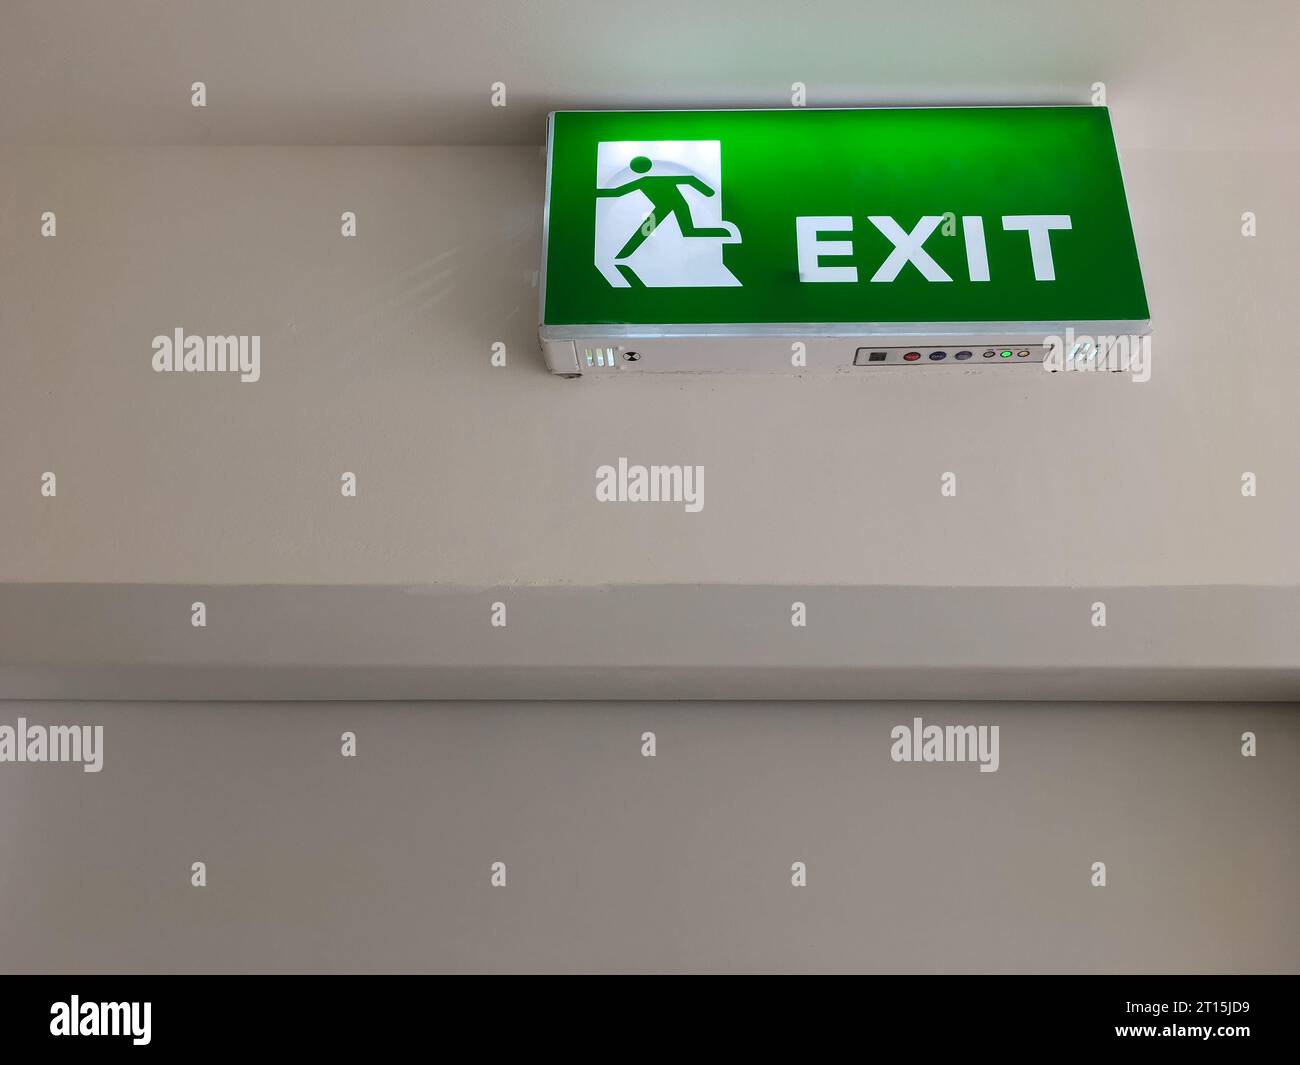 The green fire exit symbol on the ceiling shows escape routes outside the building when the fire, front view with the copy space. Stock Photo